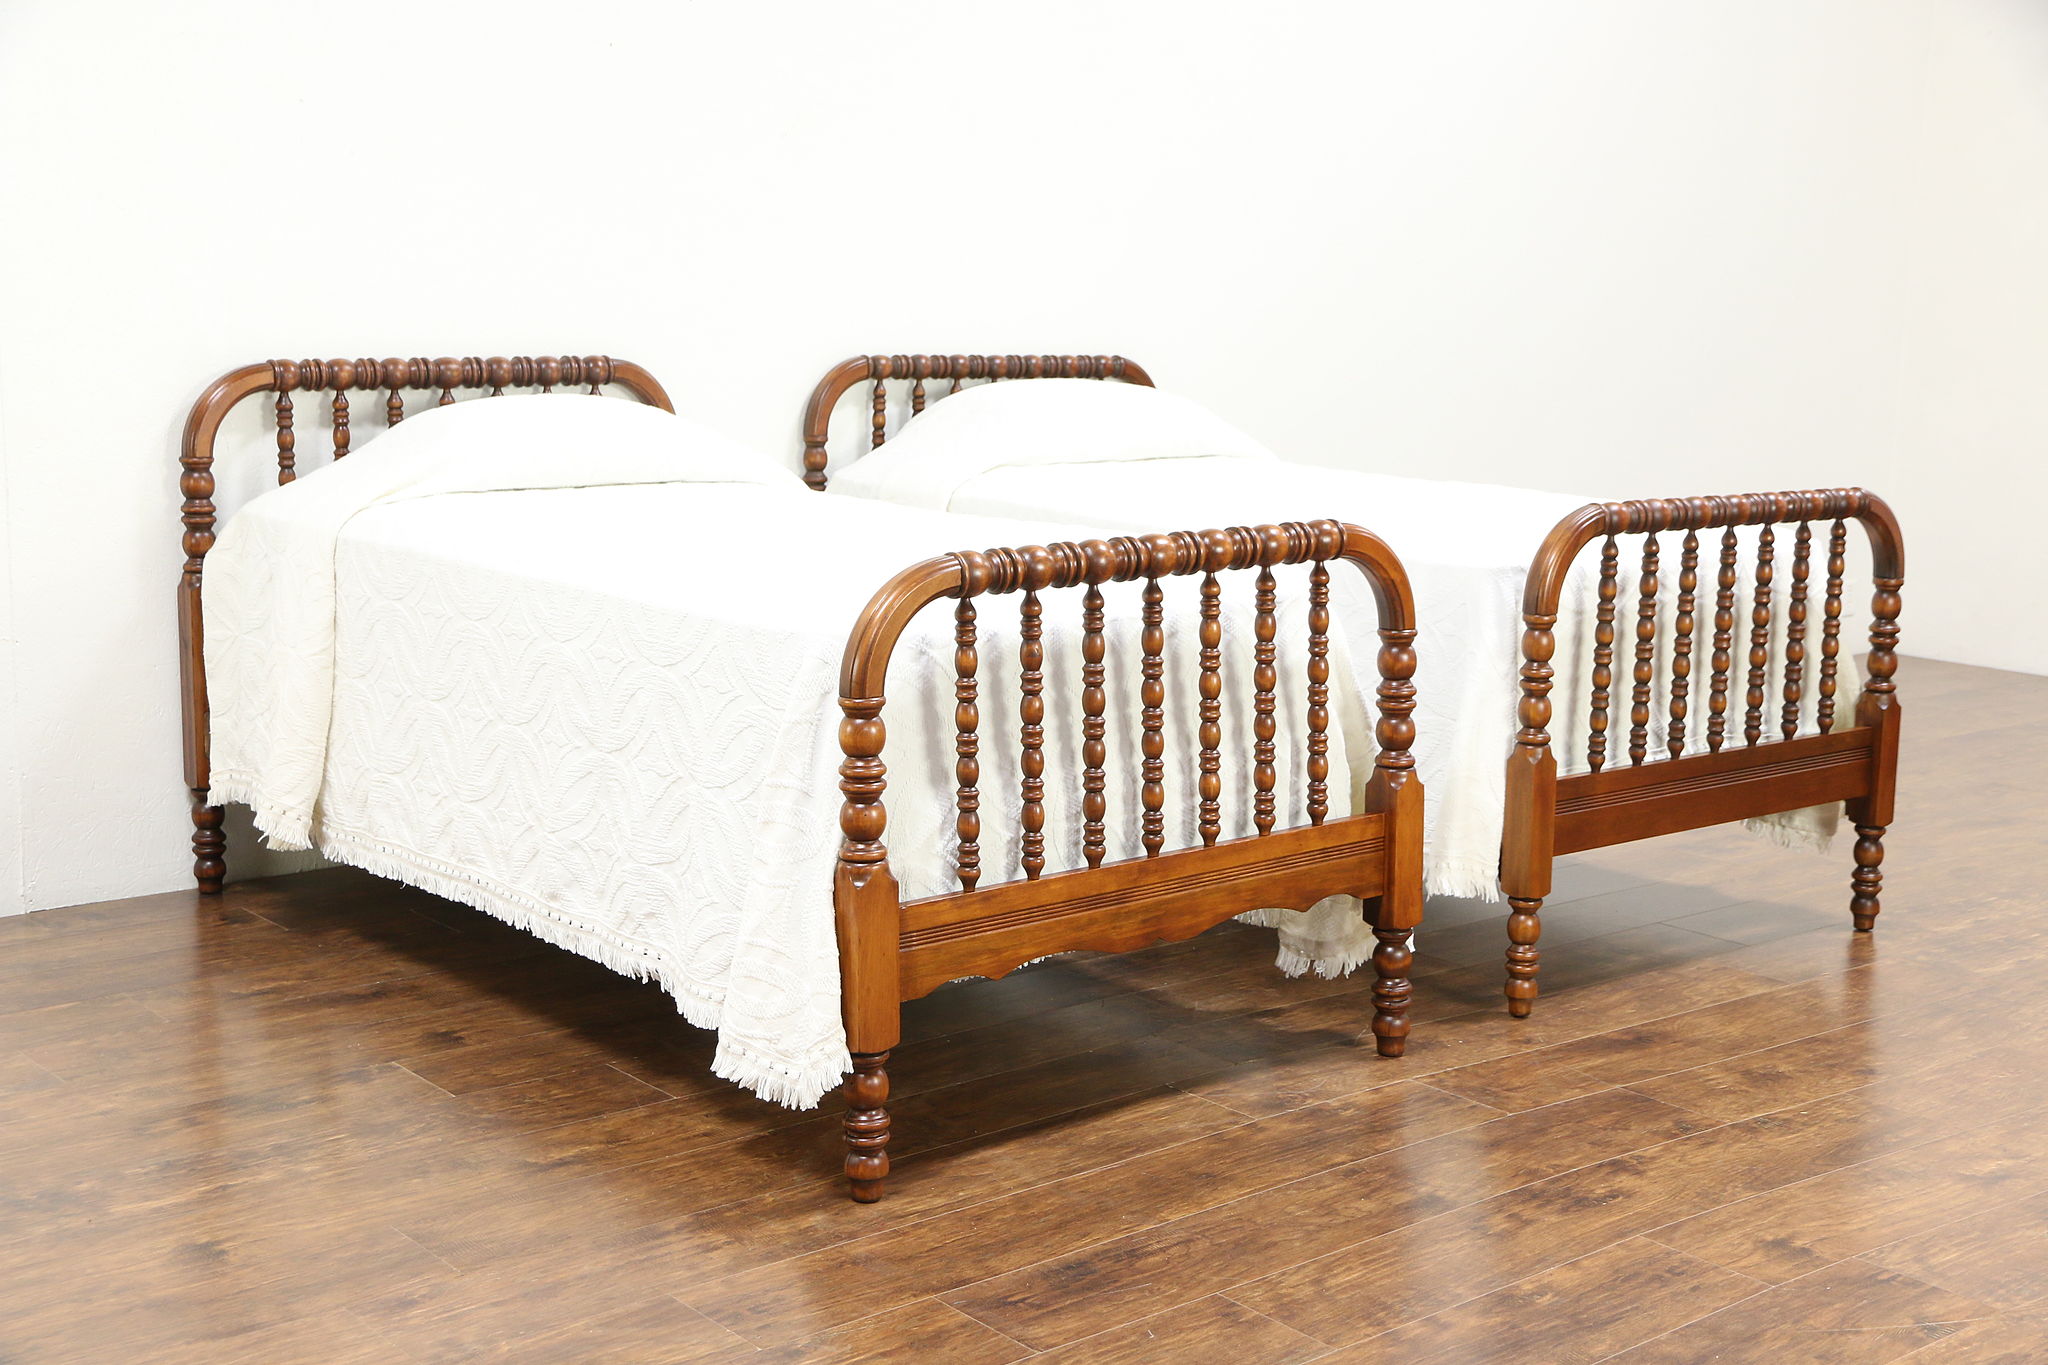 Single Maple Spool Beds, Antique Wooden Twin Bed Frames